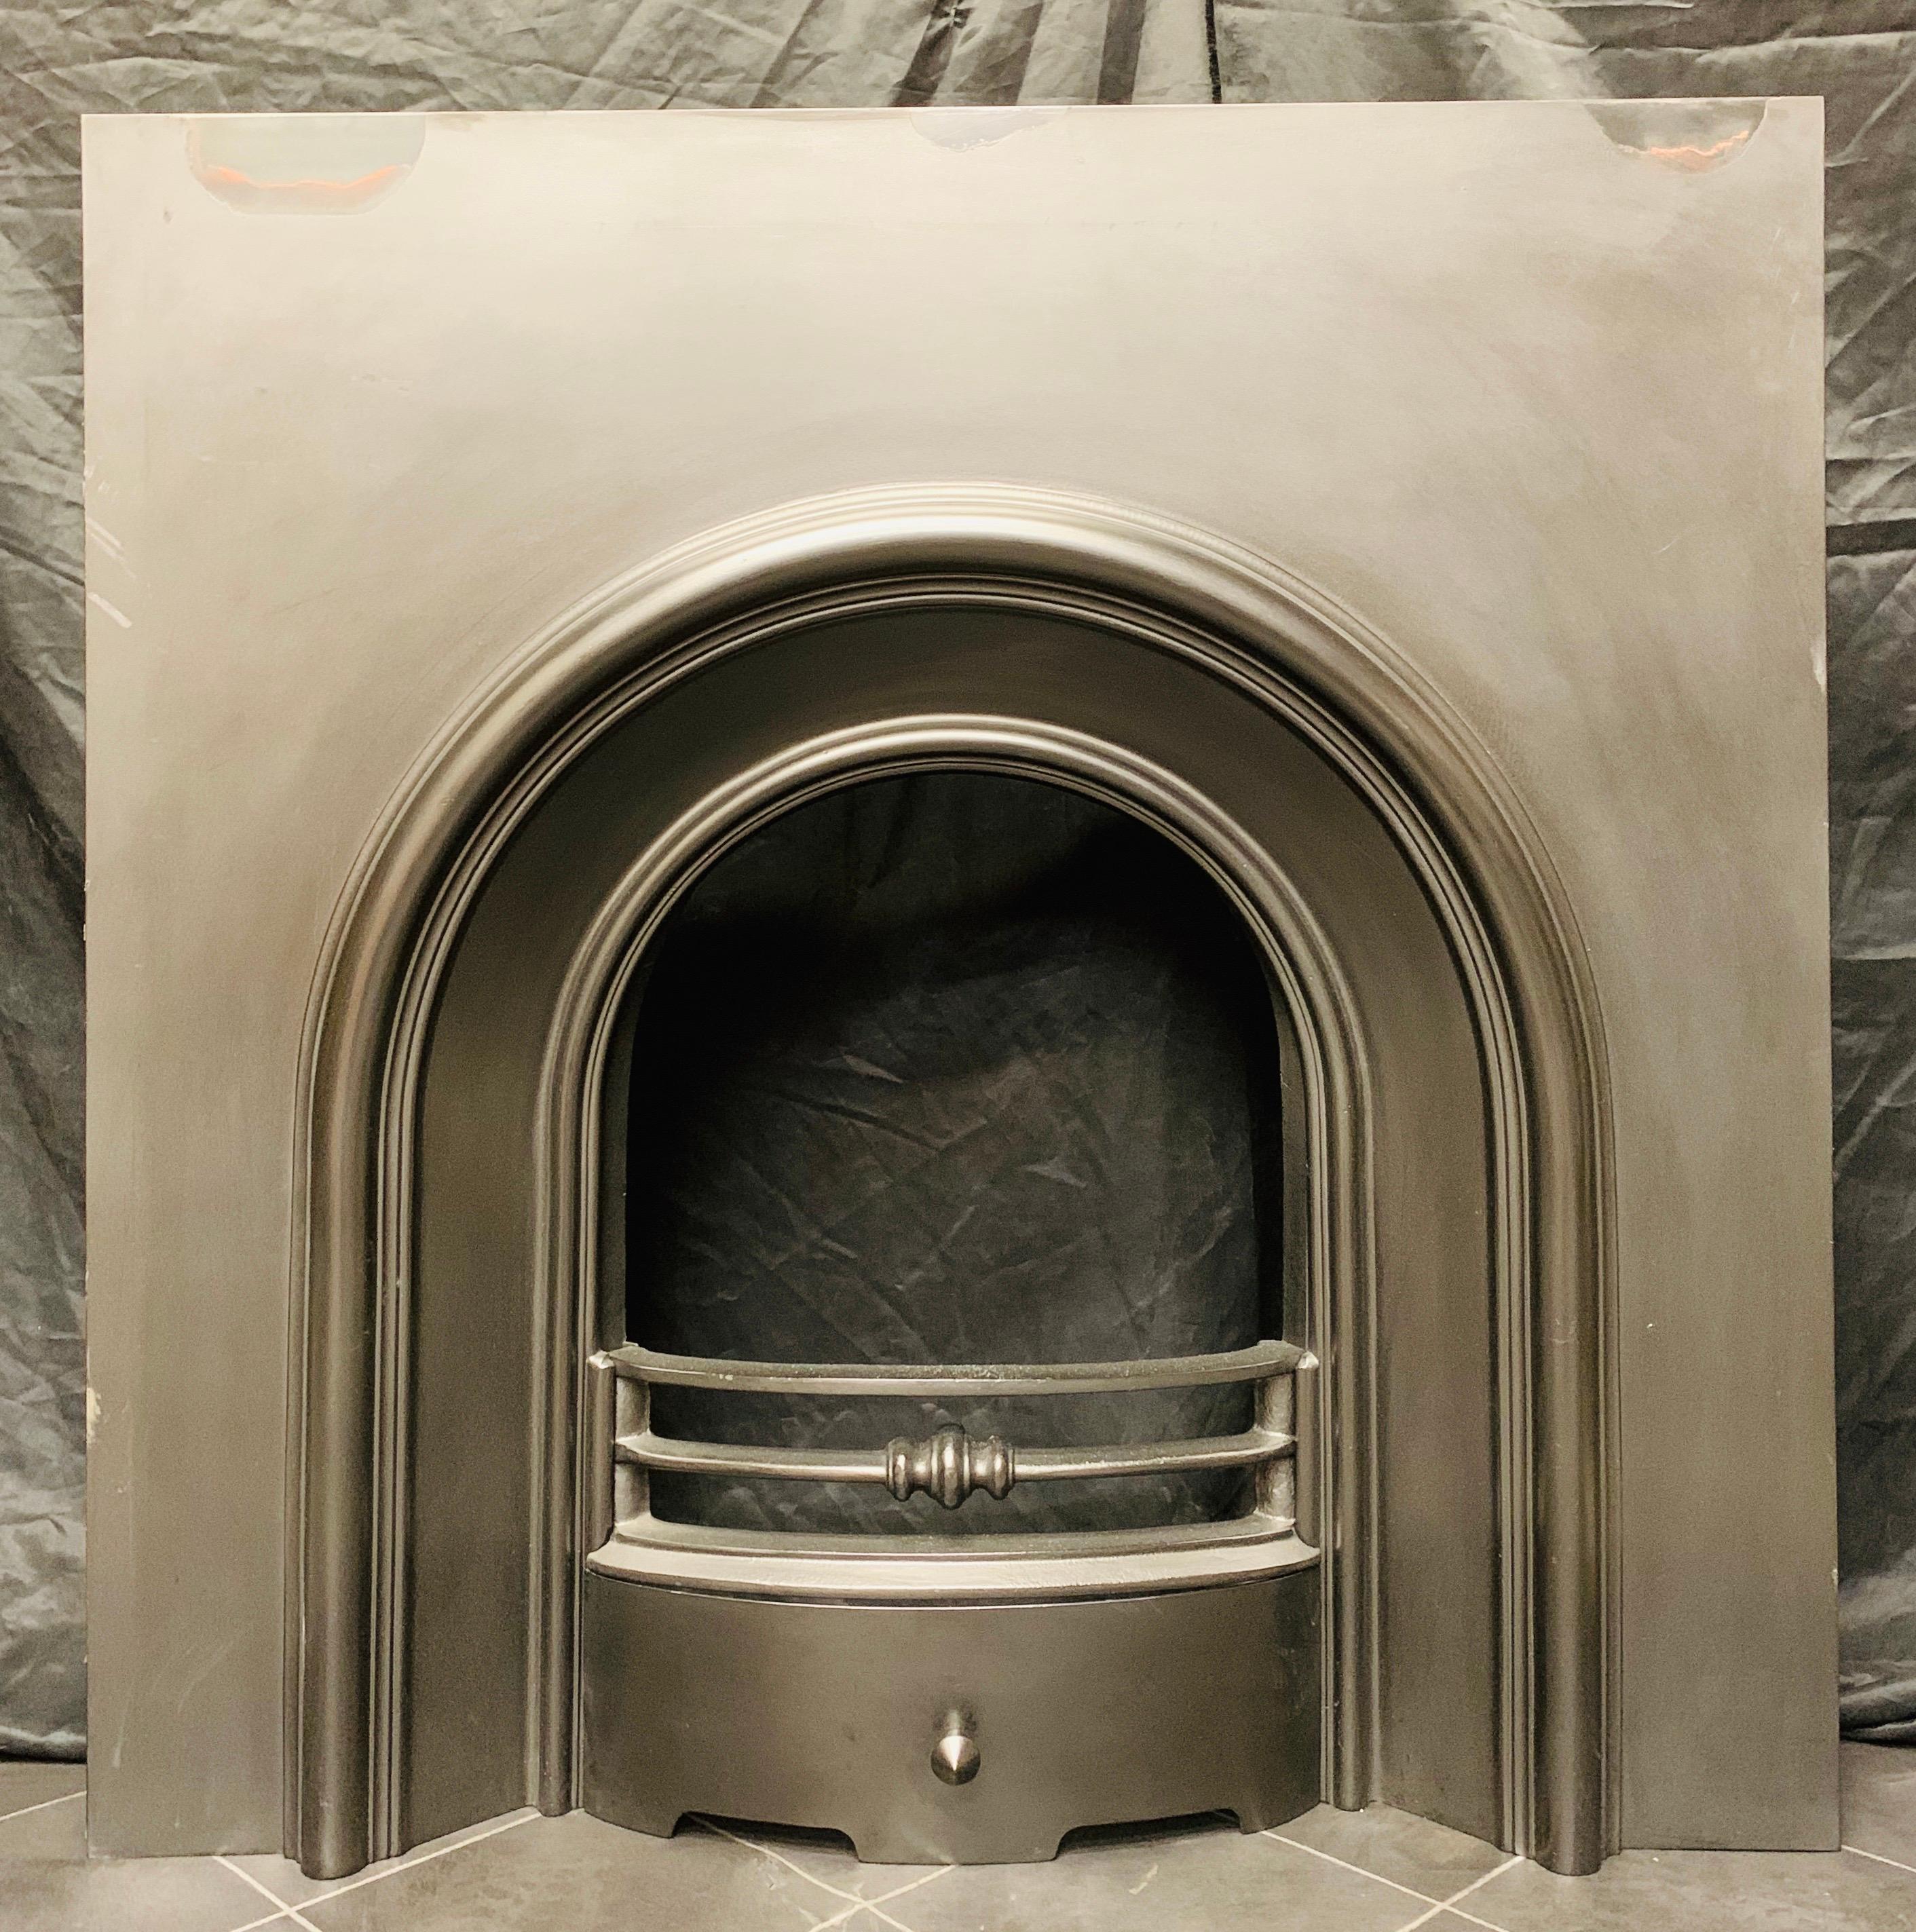 A large and simple cast iron 19th century arched fireplace insert with raised moulding and a three barred fire front complete with an ash pan door.
Scottish, circa 1880

Fire opening size: 660mm high to top of arch x 460mm wide.